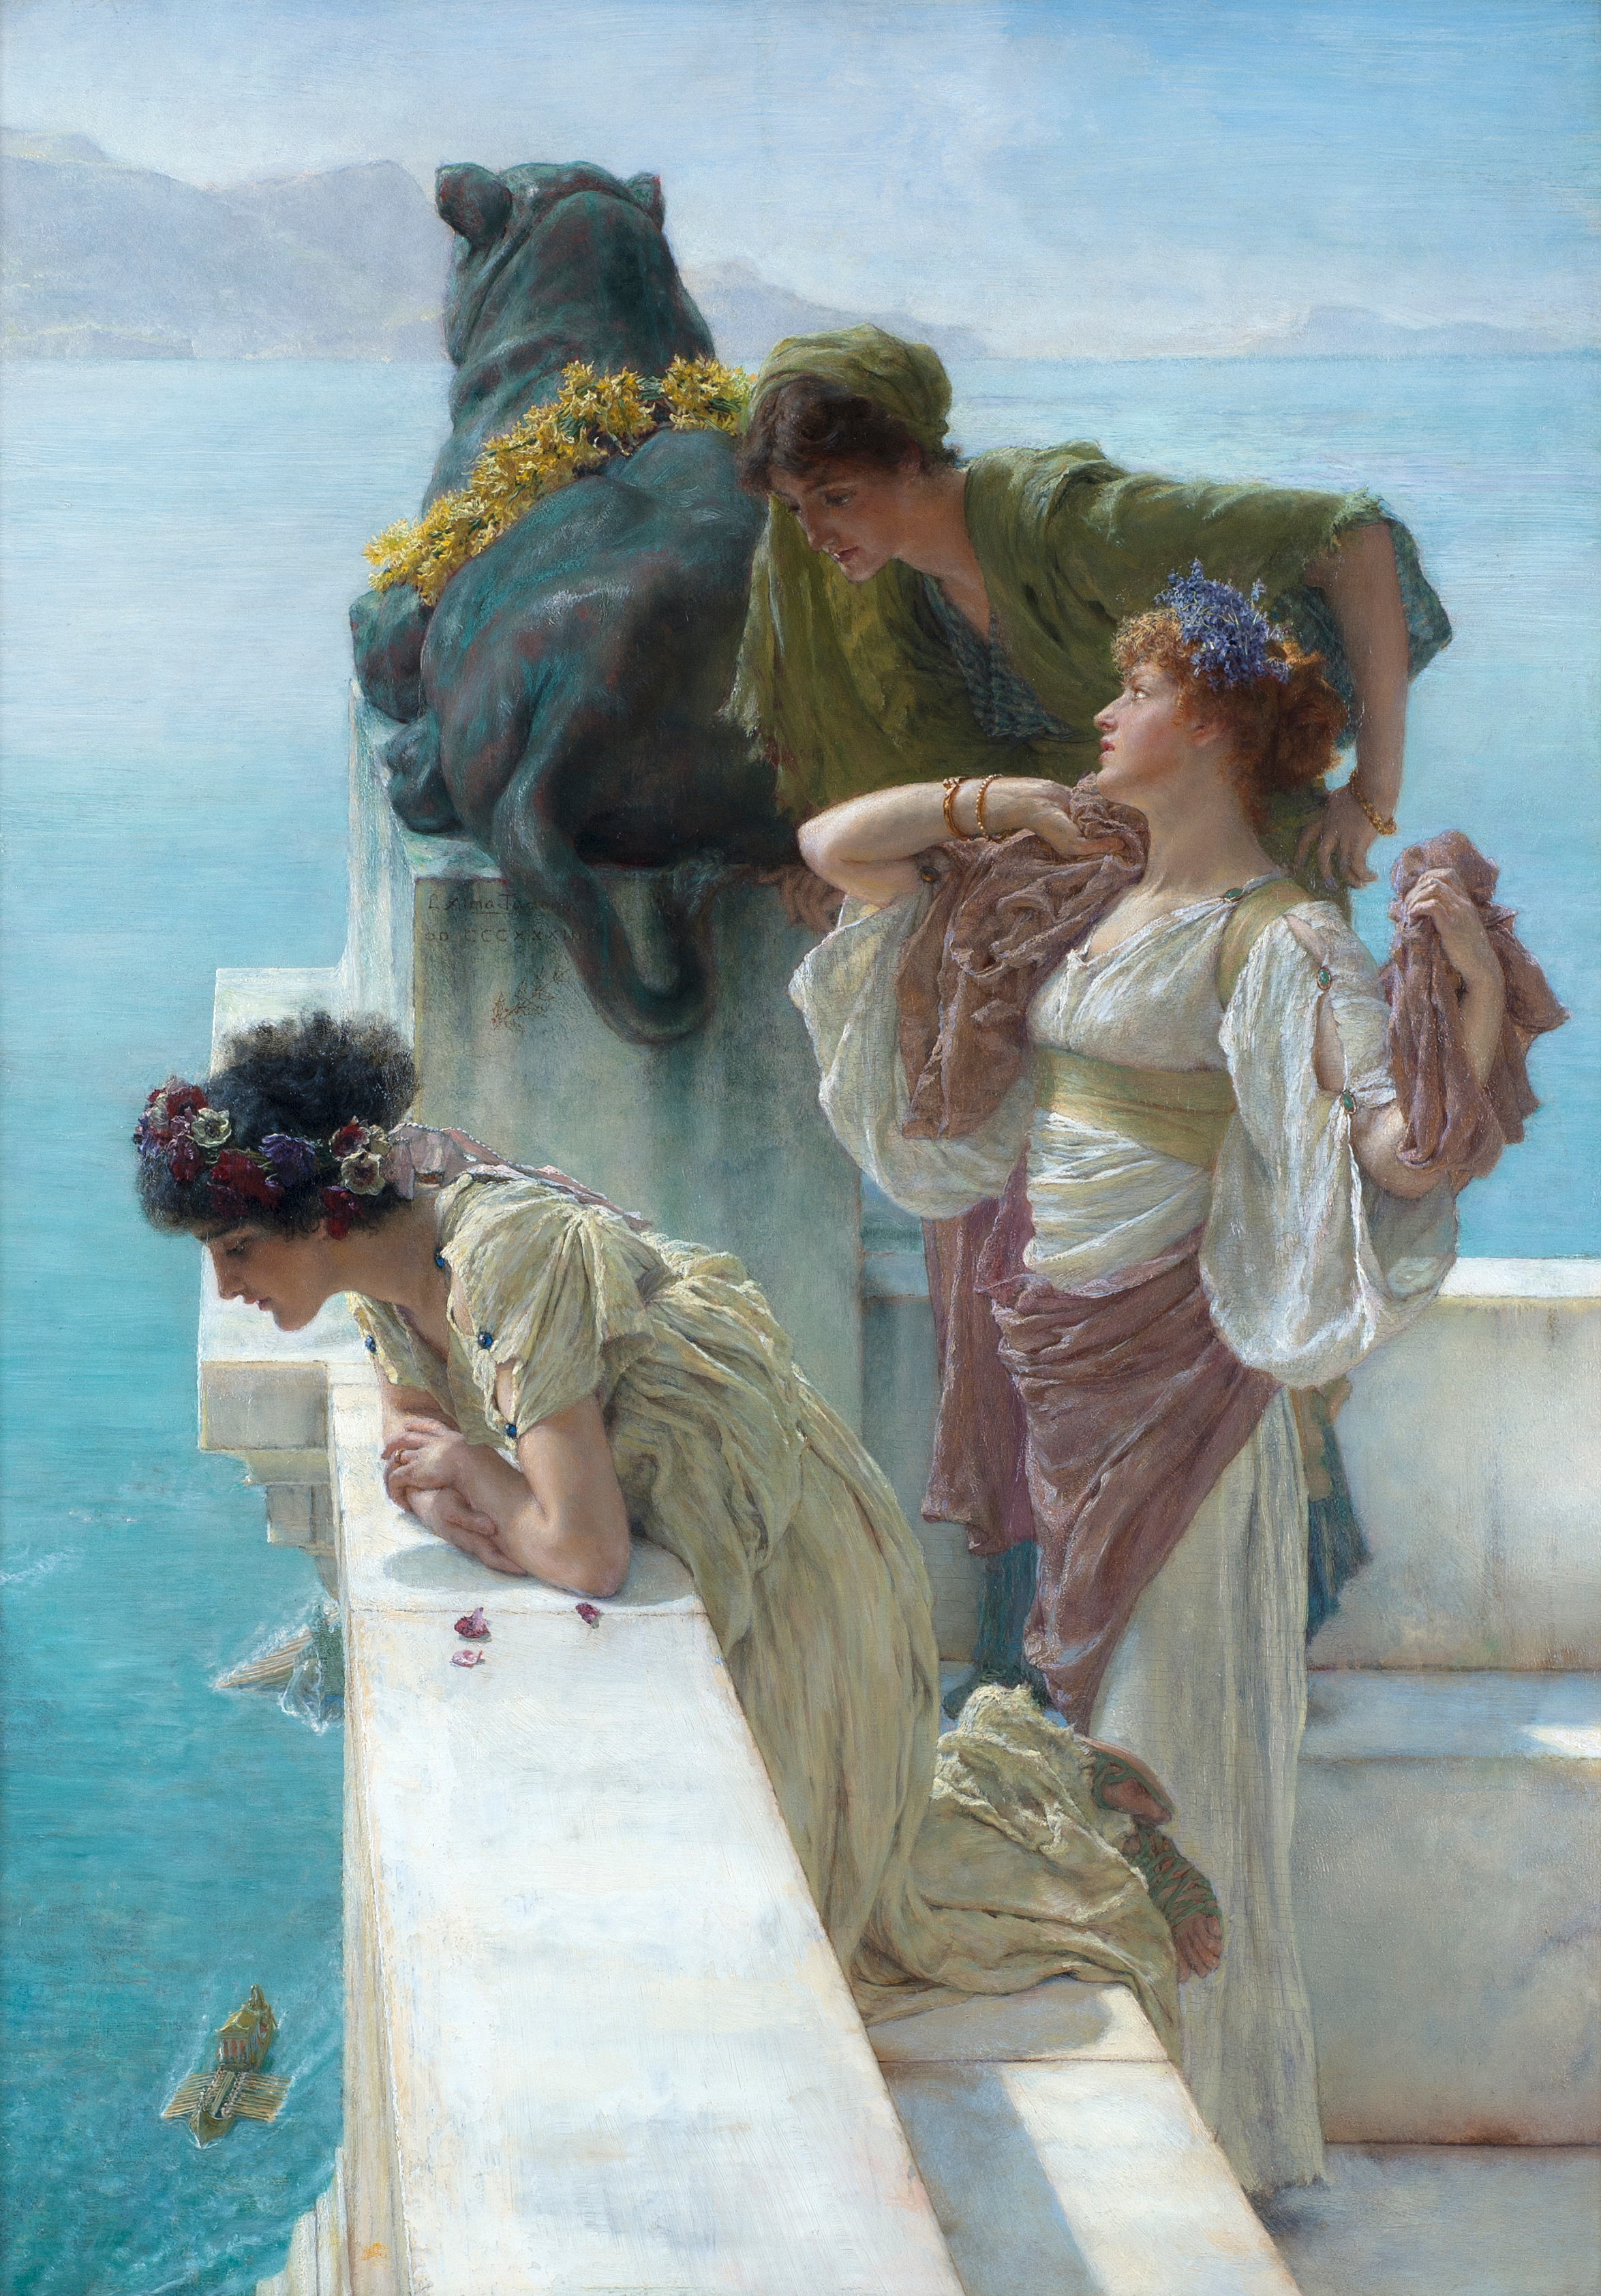 Coign of Vantage by Lawrence Alma-Tadema - 1895 - 64 x 44,5 cm private collection